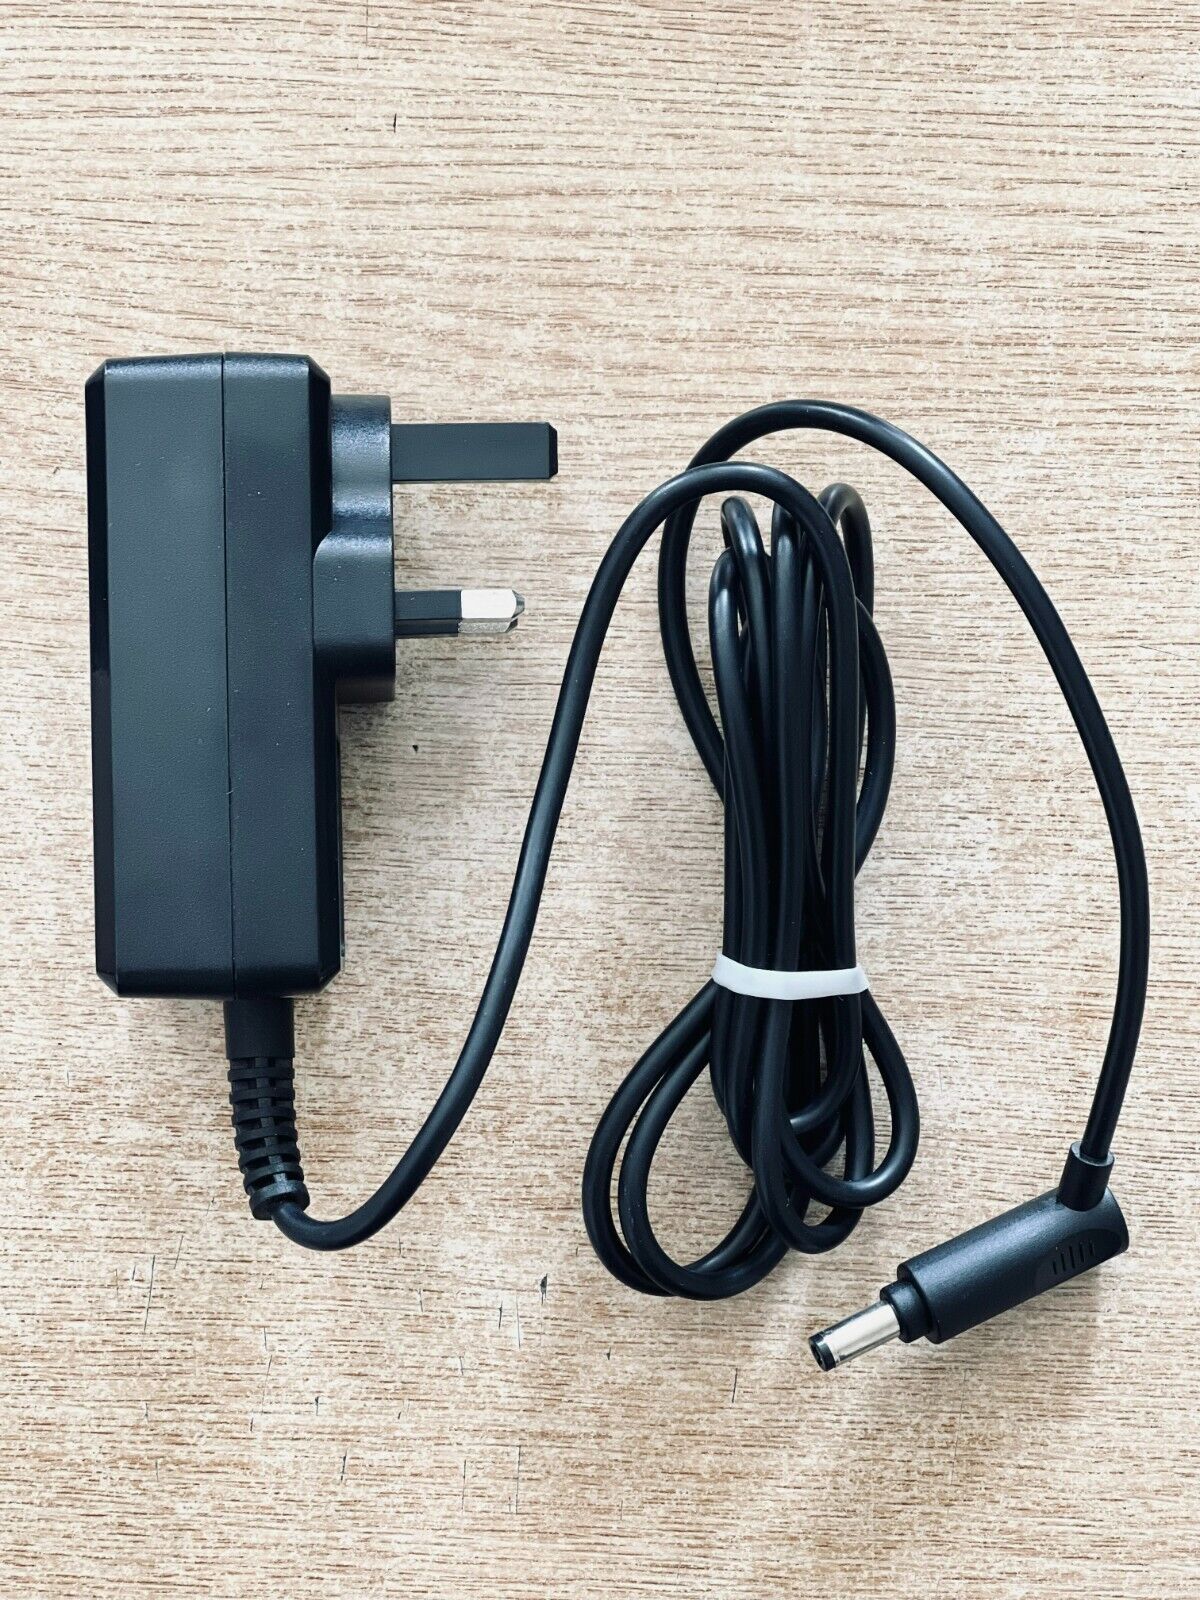 UK 12V 2A AC/DC POWER SUPPLY ADAPTER CHARGER PLUG FOR LED LAMP NAIL DRYER NAILS Voltage 12V Type AC/DC POWER SUPPLY AD